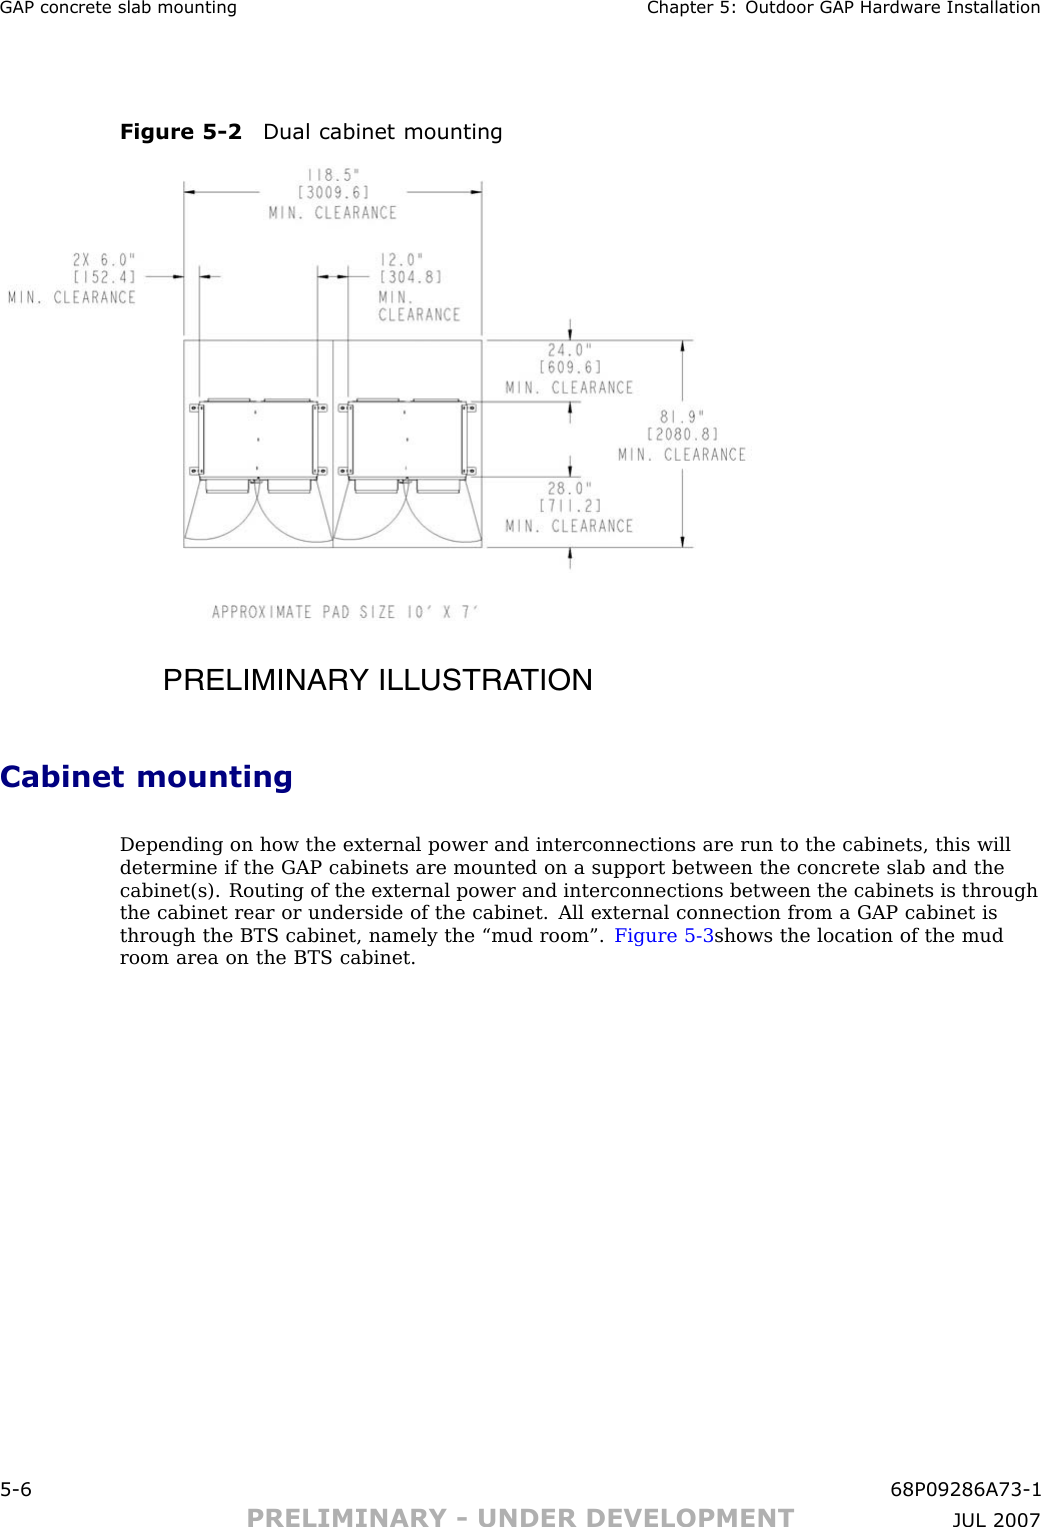 GAP concrete slab mounting Chapter 5: Outdoor GAP Hardw are InstallationFigure 5 -2 Dual cabinet mountingPRELIMINARY ILLUSTRATIONCabinet mountingDepending on how the external power and interconnections are run to the cabinets, this willdetermine if the GAP cabinets are mounted on a support between the concrete slab and thecabinet(s). Routing of the external power and interconnections between the cabinets is throughthe cabinet rear or underside of the cabinet. All external connection from a GAP cabinet isthrough the BTS cabinet, namely the “mud room”. Figure 5 -3 shows the location of the mudroom area on the BTS cabinet.5 -6 68P09286A73 -1PRELIMINARY - UNDER DEVELOPMENT JUL 2007